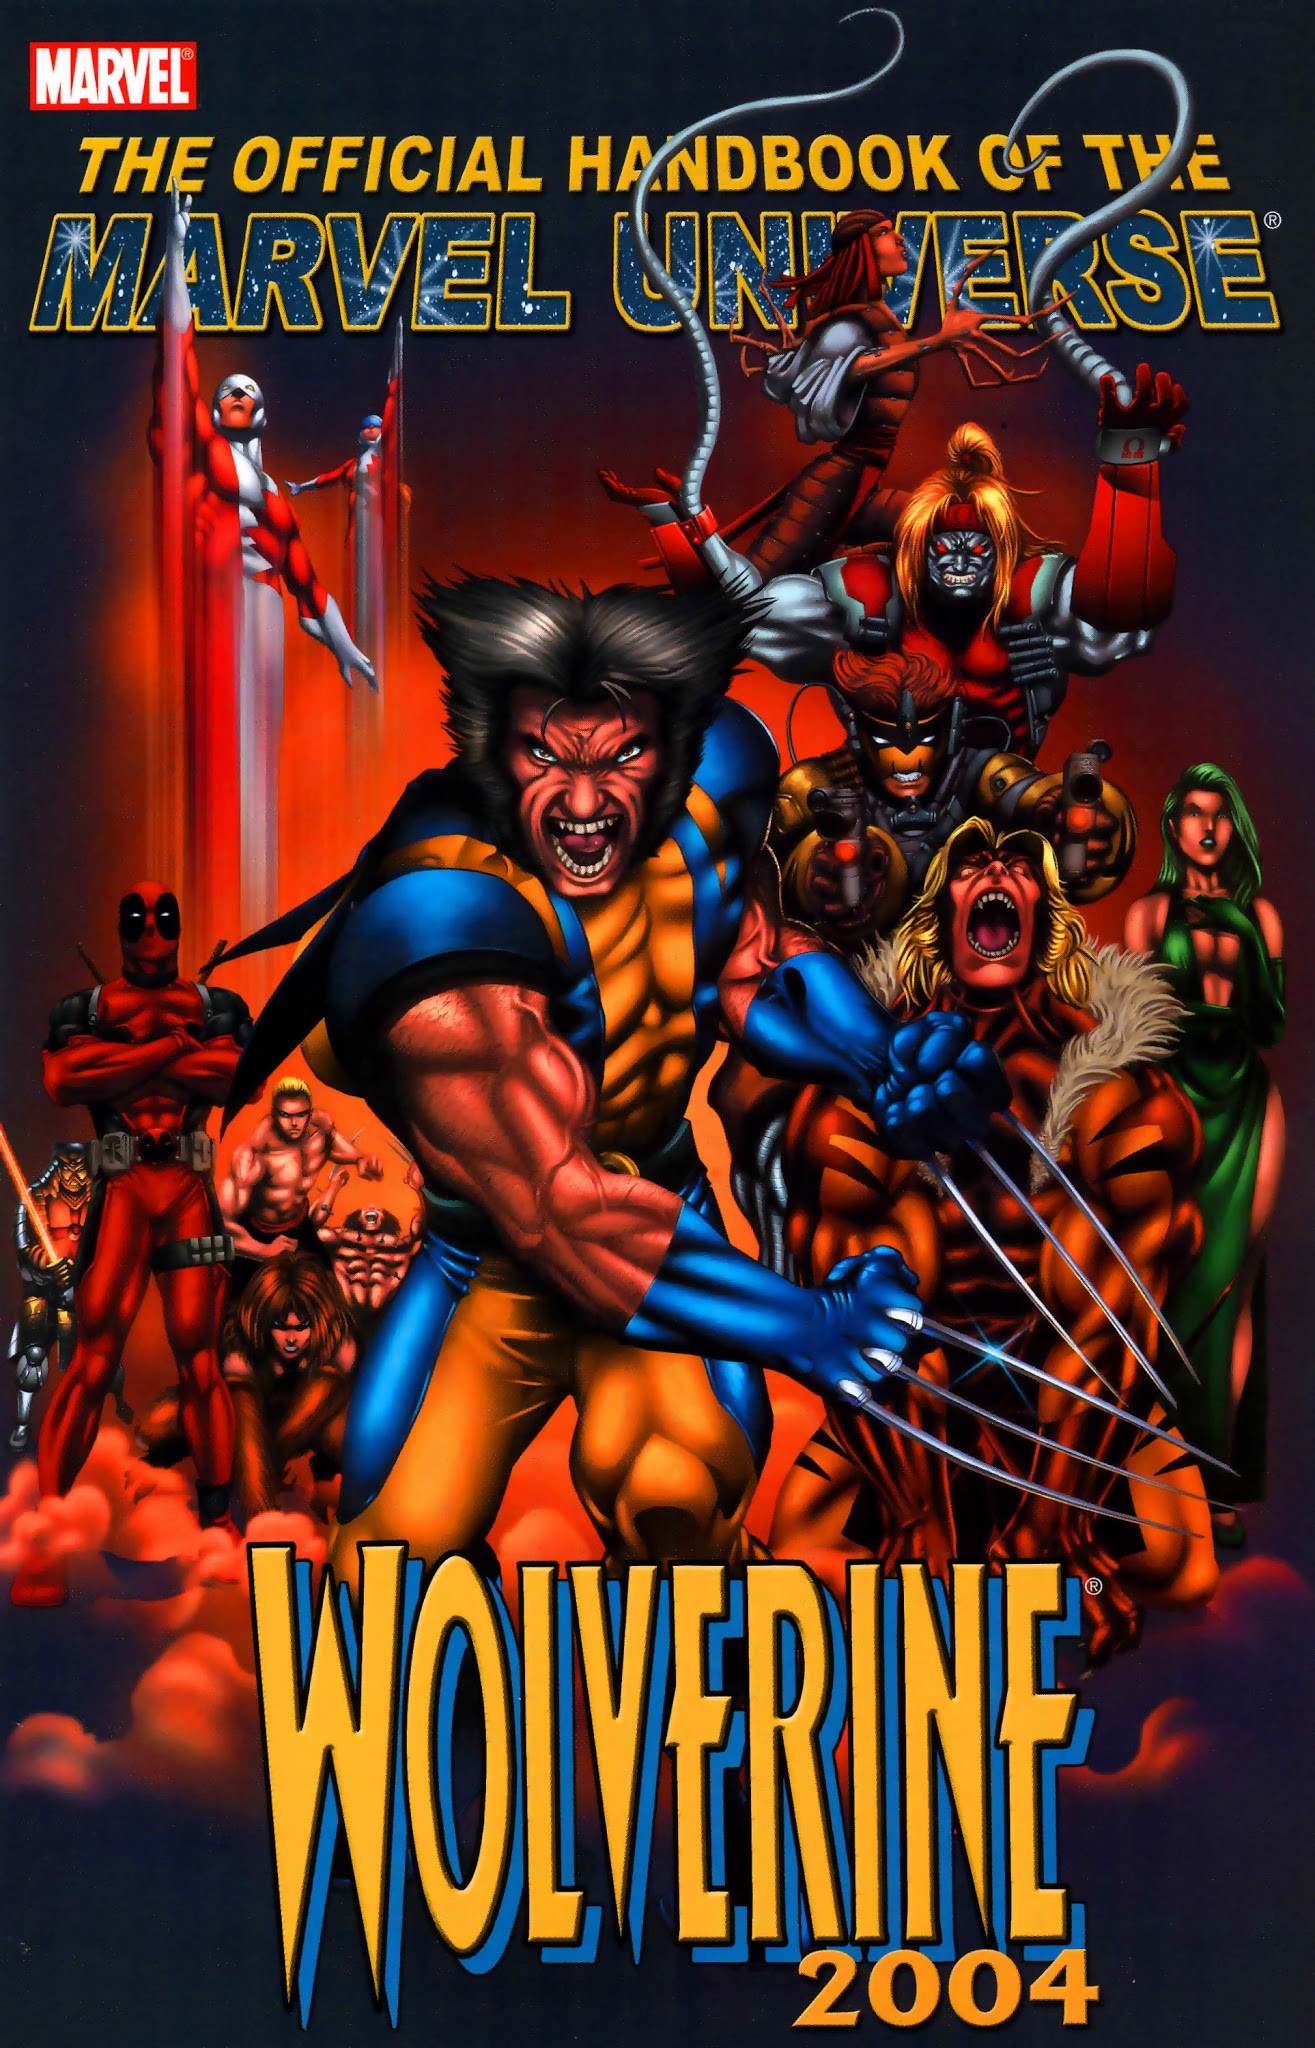 Read online Official Handbook of the Marvel Universe: Wolverine 2004 comic -  Issue # Full - 1